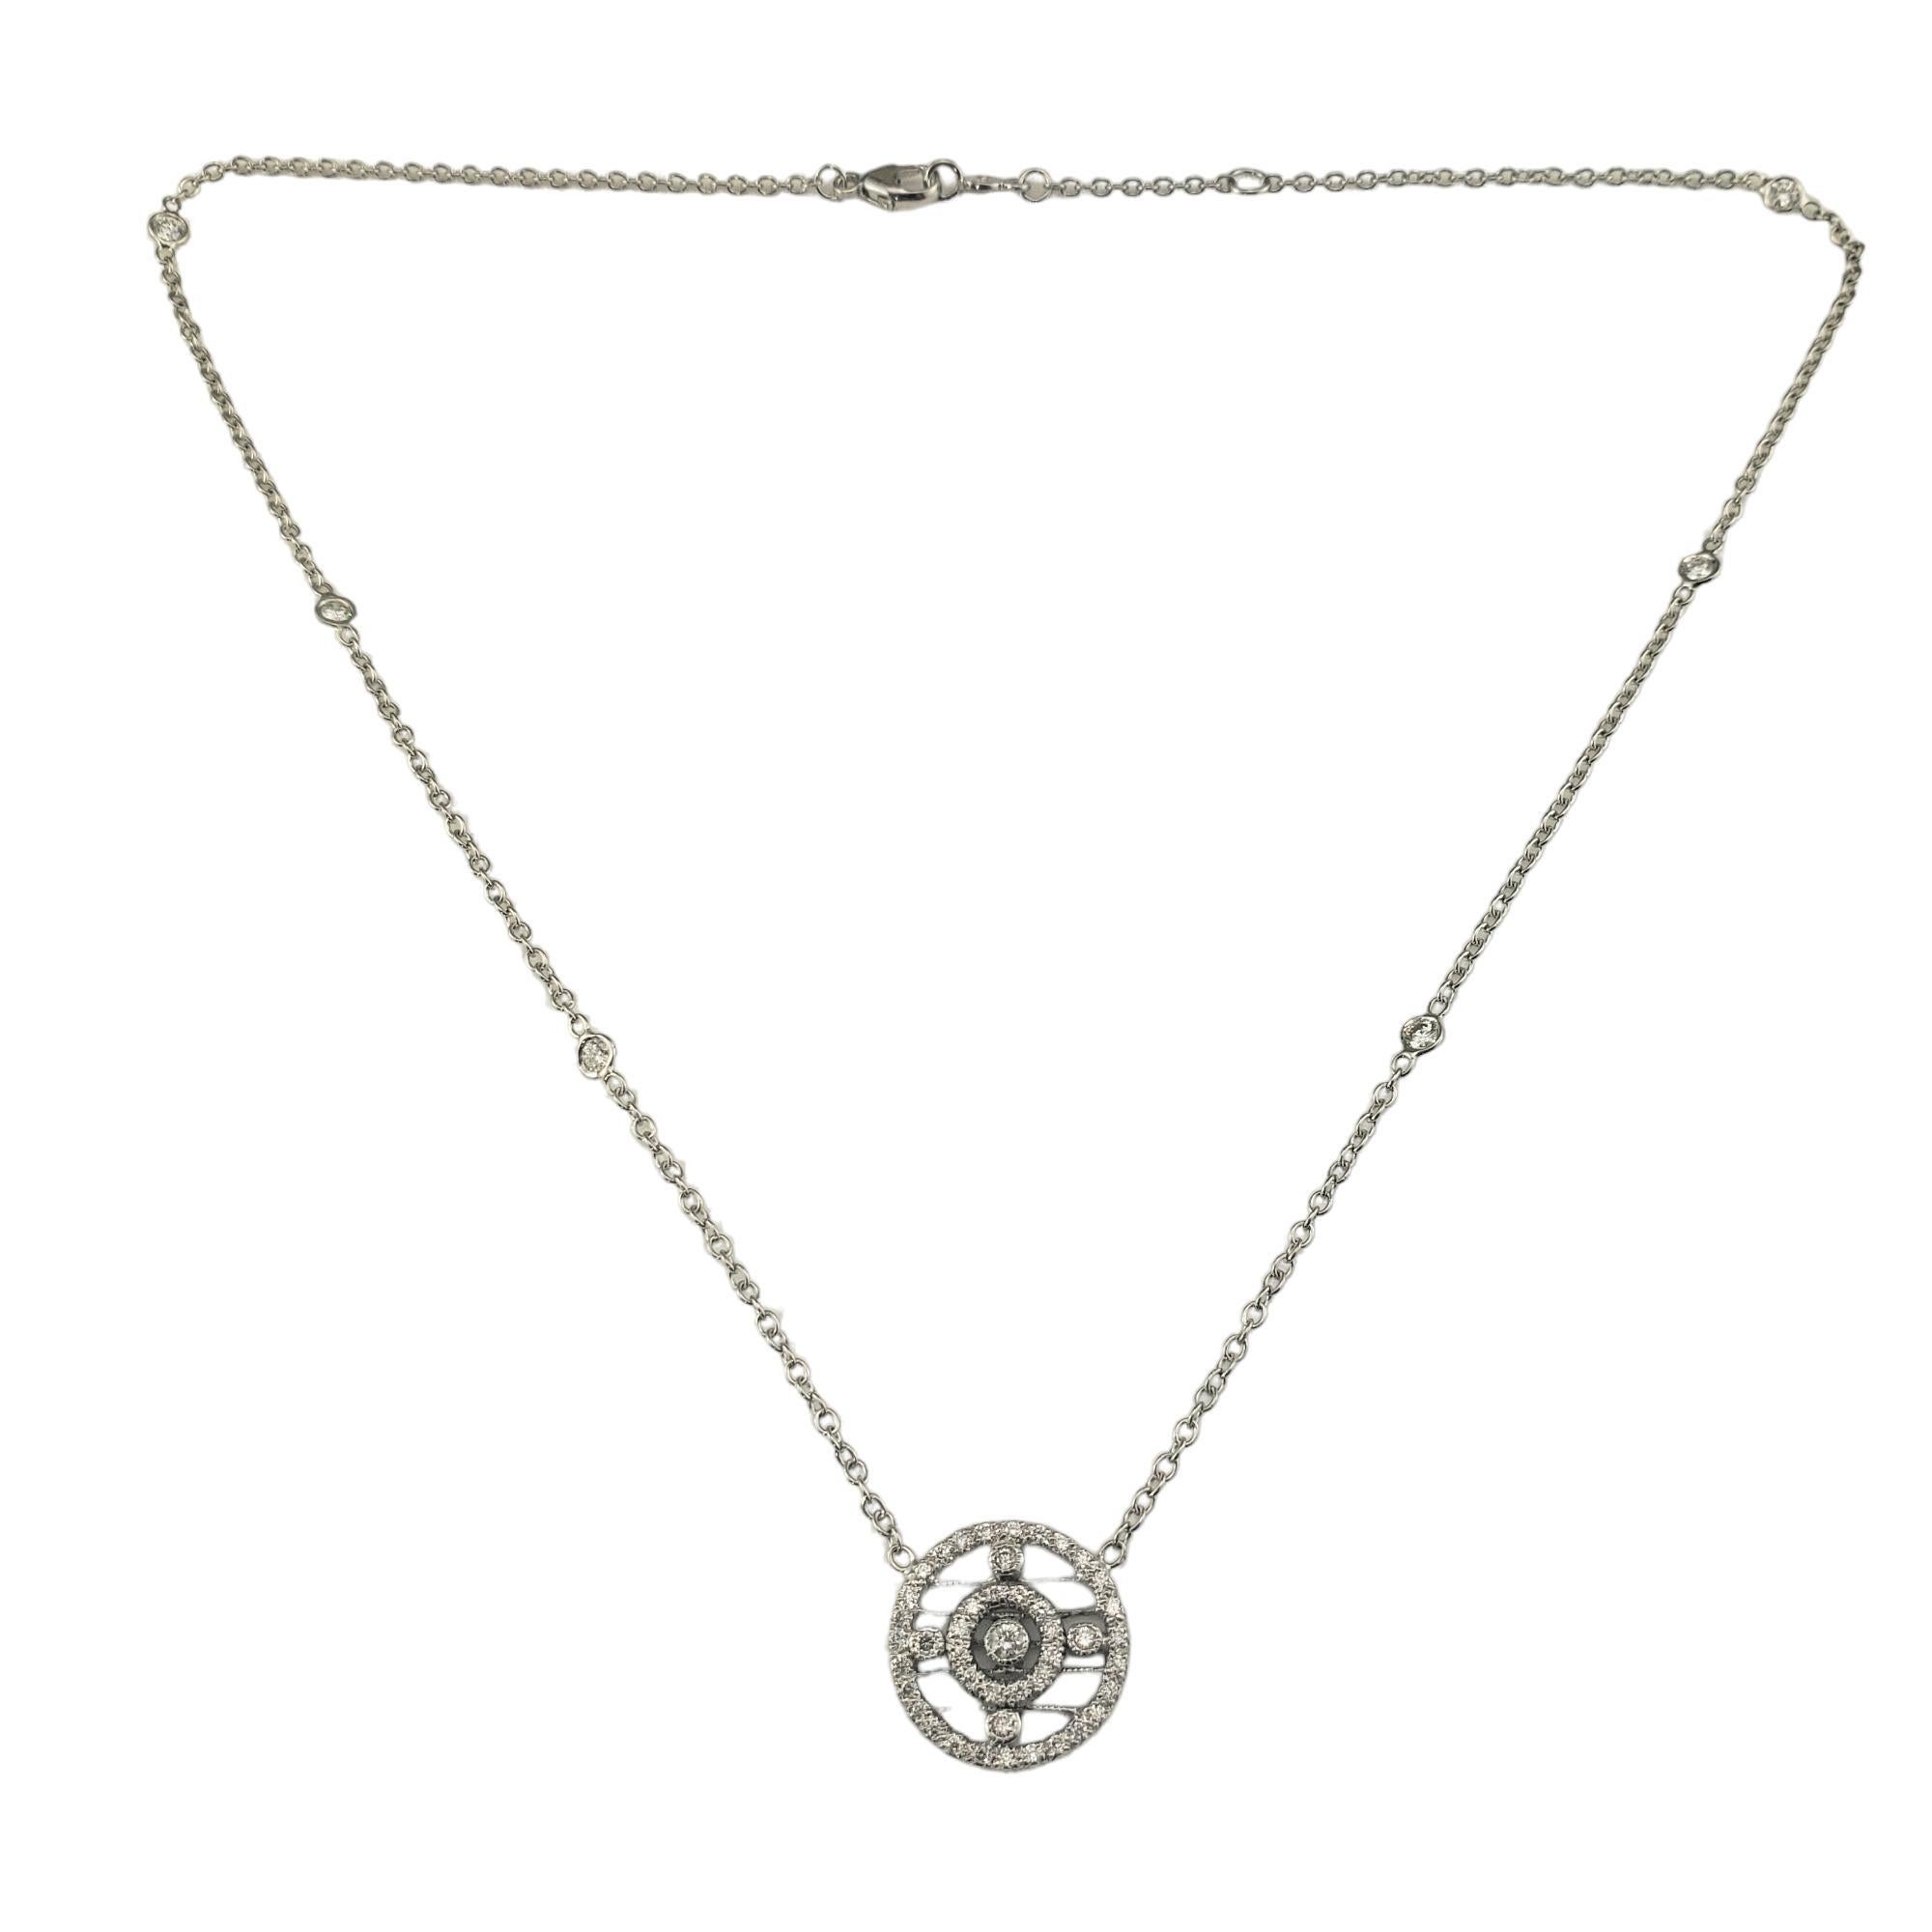 18 Karat White Gold and Diamond Circle Pendant Necklace

This sparkling pendant necklace features 49 round brilliant cut diamonds (43 in pendant, 6 on chain) set in beautifully detailed 18K white gold. 

Approximate total diamond weight: .65